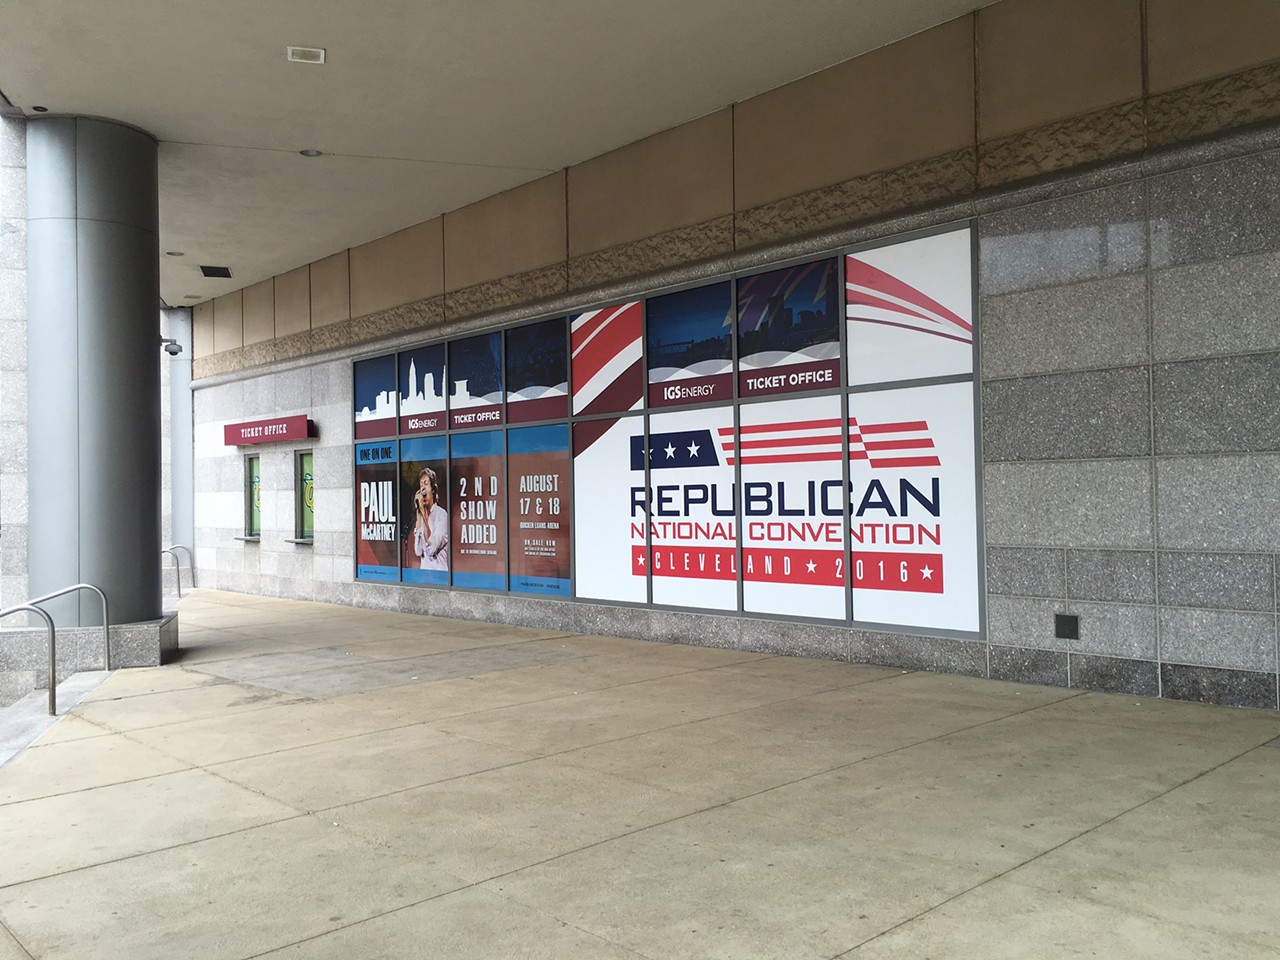 Photos: Crews Begin Transforming the Outside of the Q for the RNC